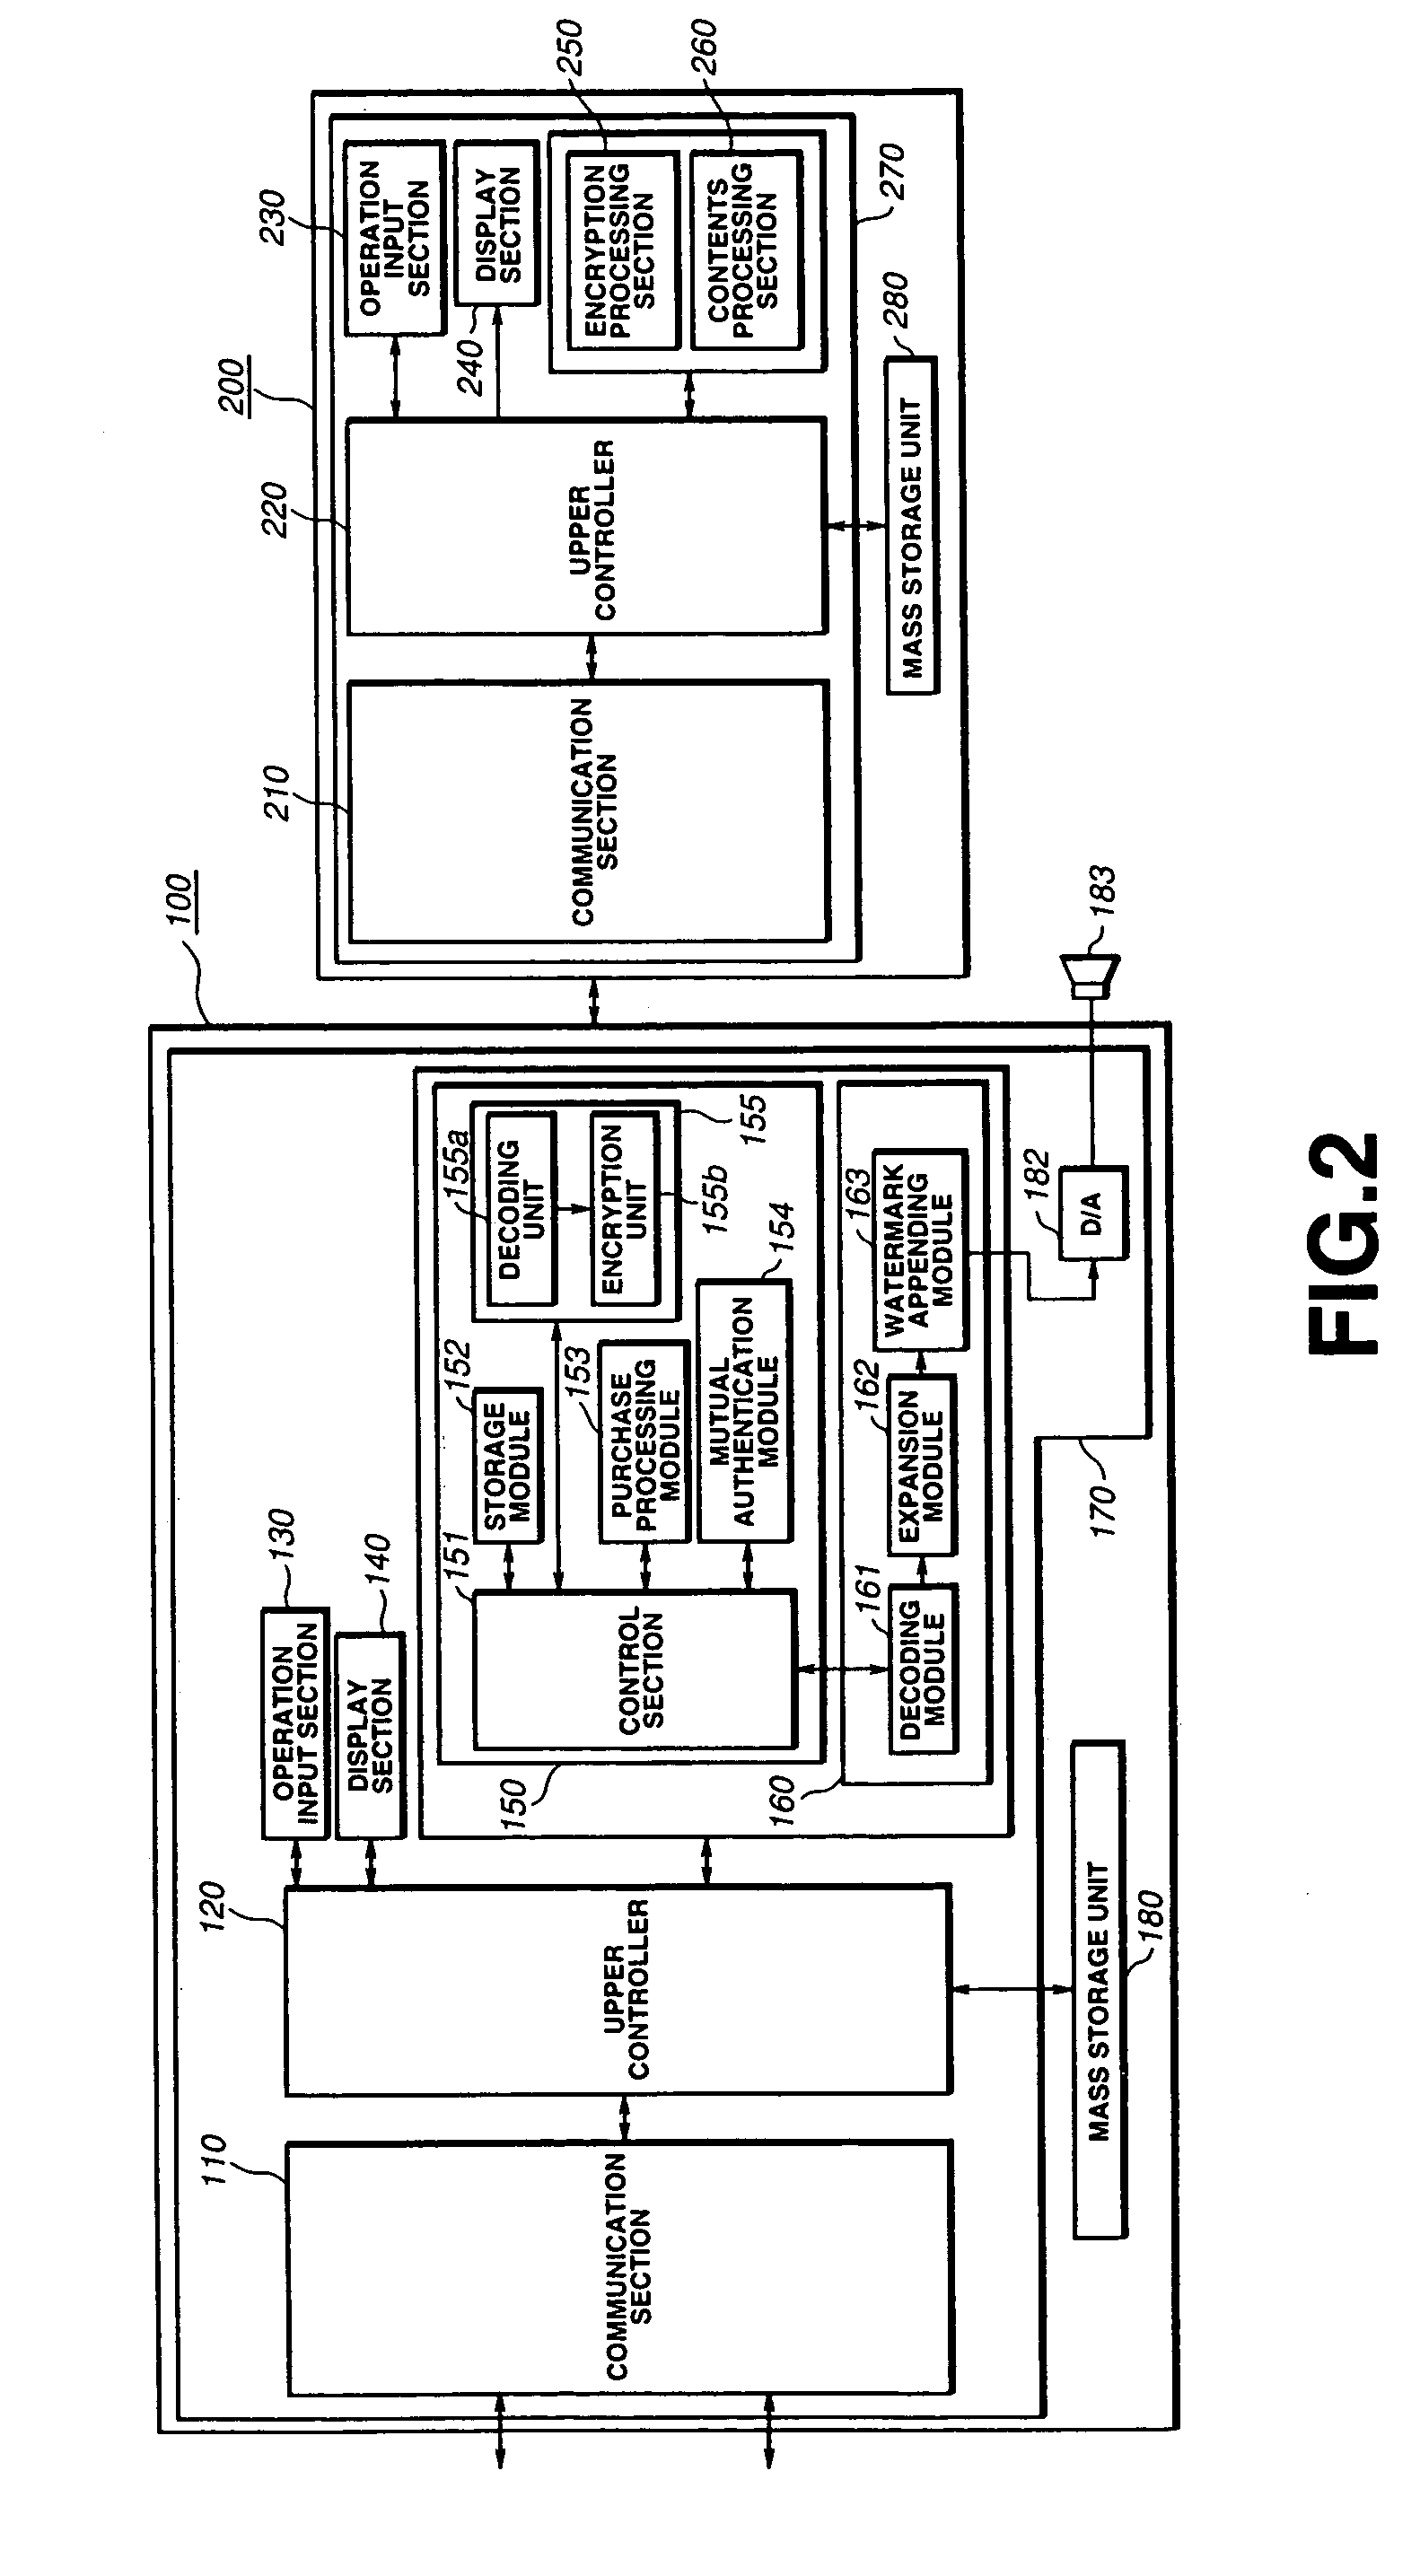 Contents processing system